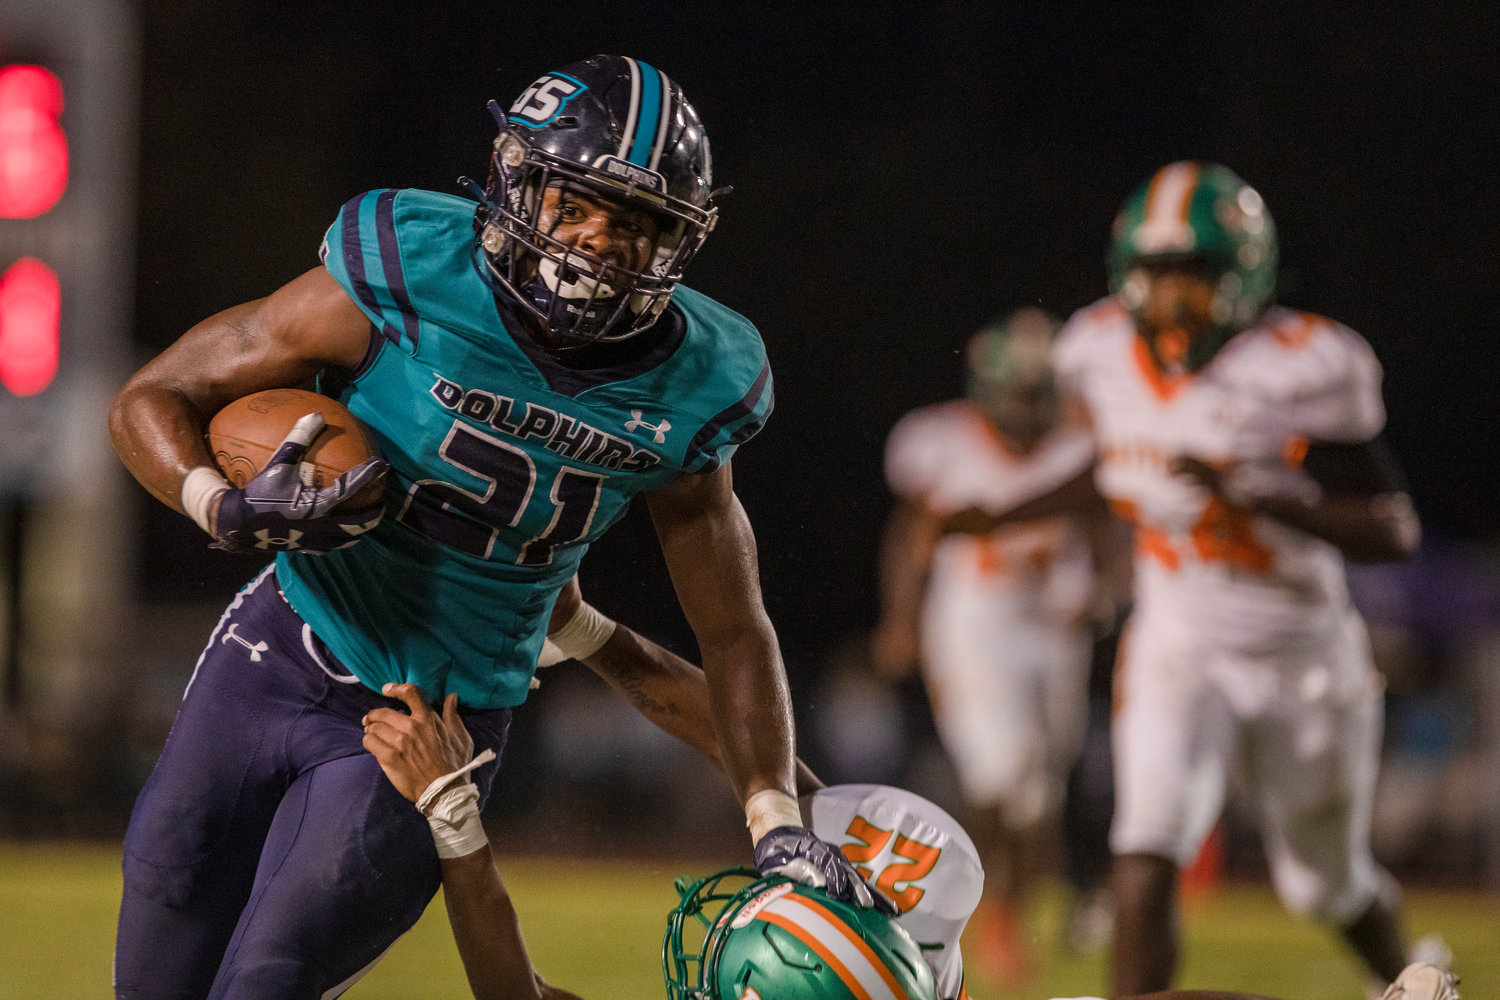 Gulf Shores senior JR Gardner delivers a stiff arm on a run during the Dolphins’ region game against the LeFlore Rattlers Sept. 16 at home. Gulf Shores won 45-12.